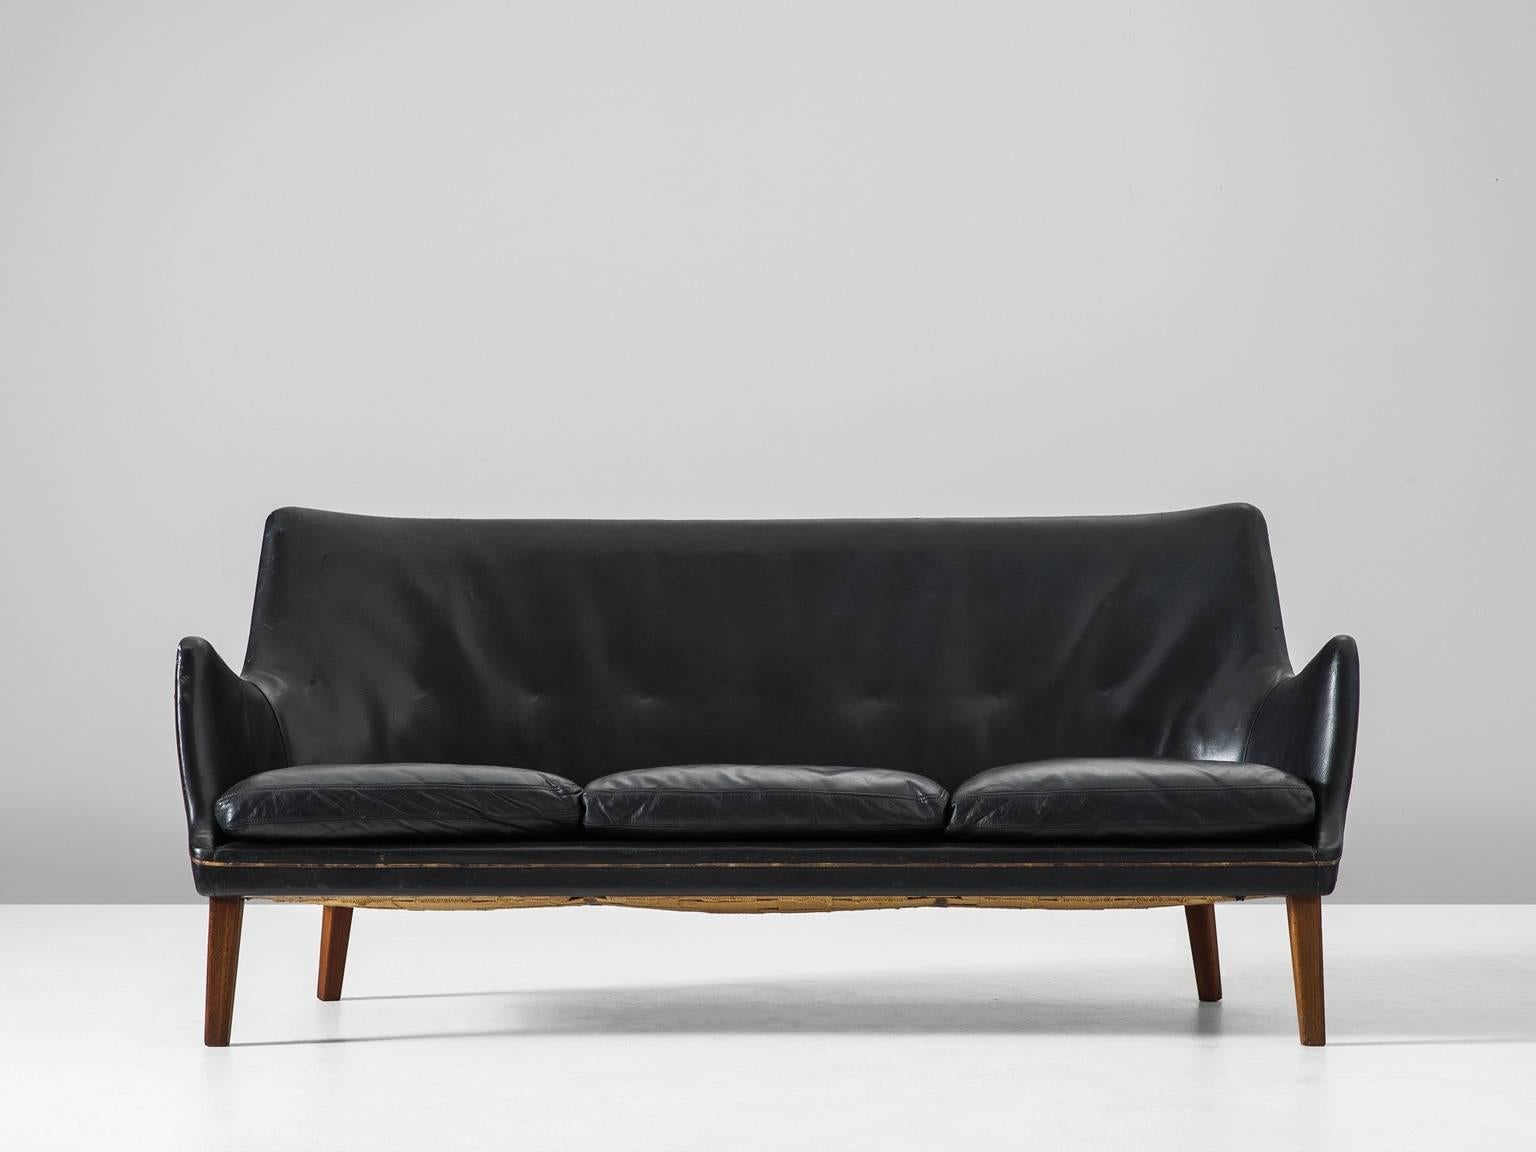 Sofa, in leather and wood, by Arne Vodder for Ivan Schlechter, Denmark 1953.

Elegant three-seat sofa in black leather by Danish designer Arne Vodder. This sofa shows the great craftsmanship of Arne Vodder. The seating and back show a nice organic